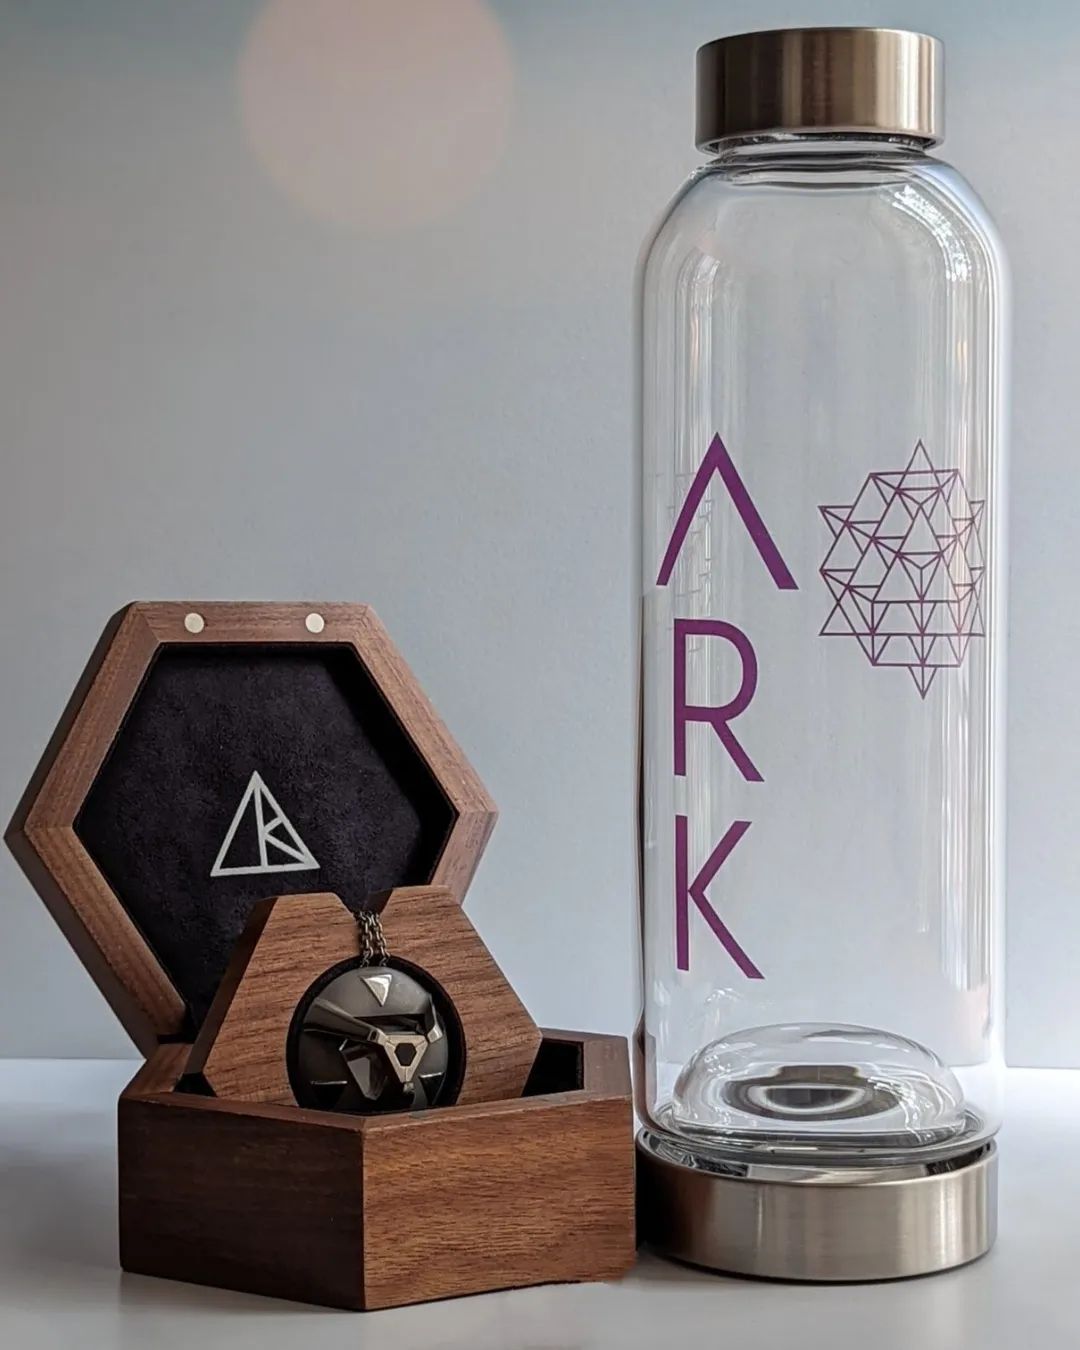 ARK crystal pendant in box and the ARK water bottle